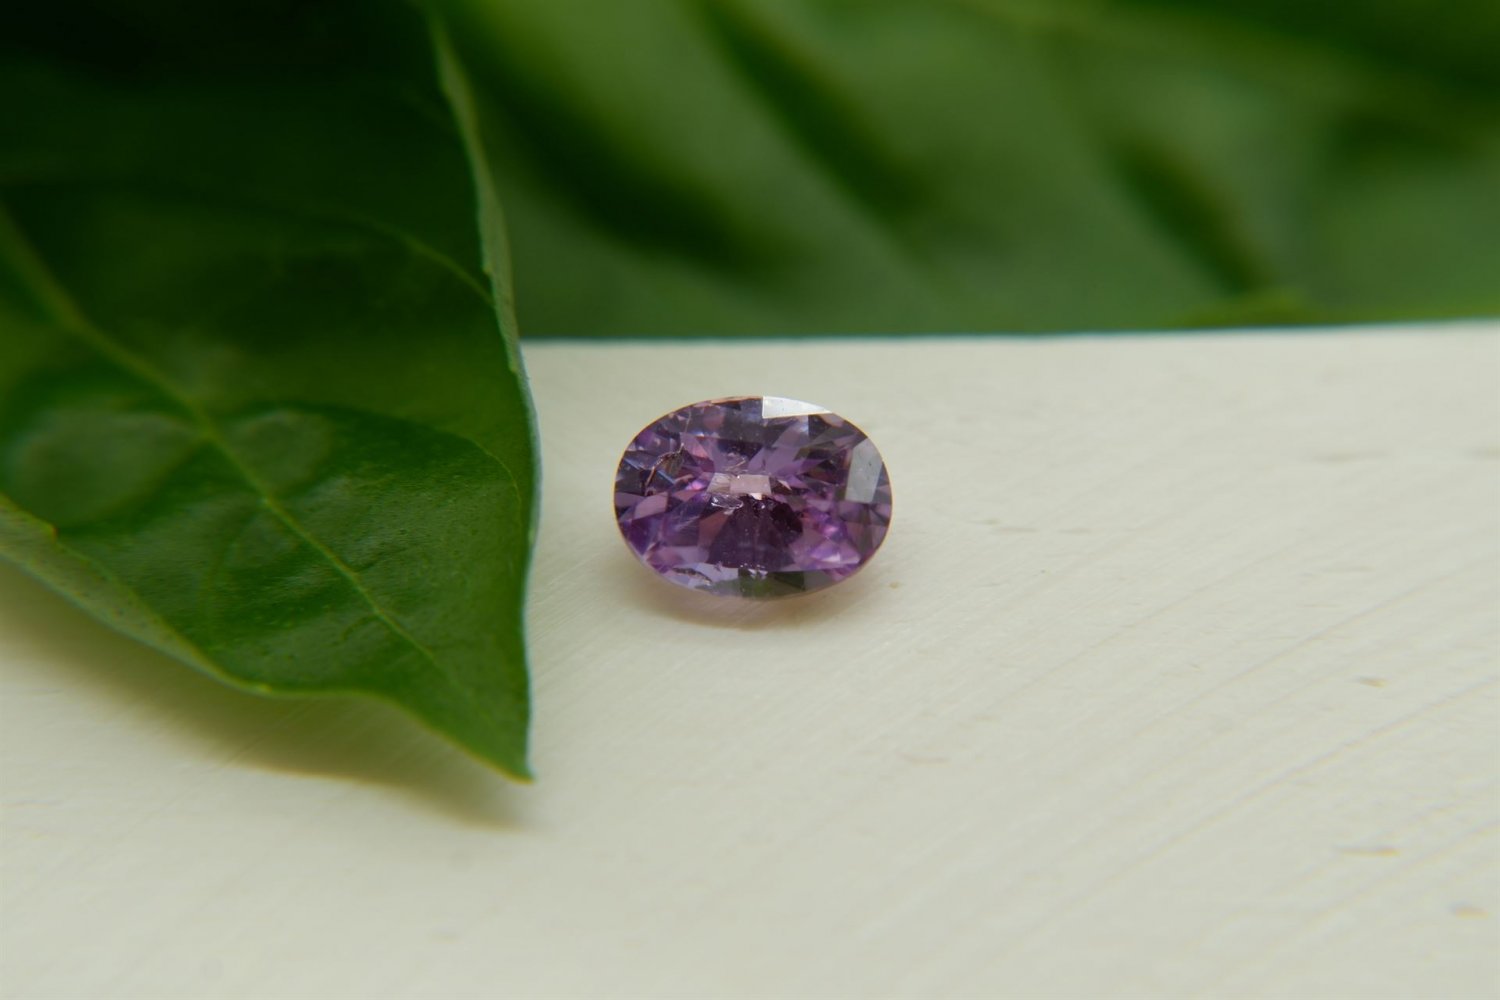 1.15 ct  Pastel Violet Sapphire, handcrafted cut premium handcrafted oval checkerboard cut Sri Lanka